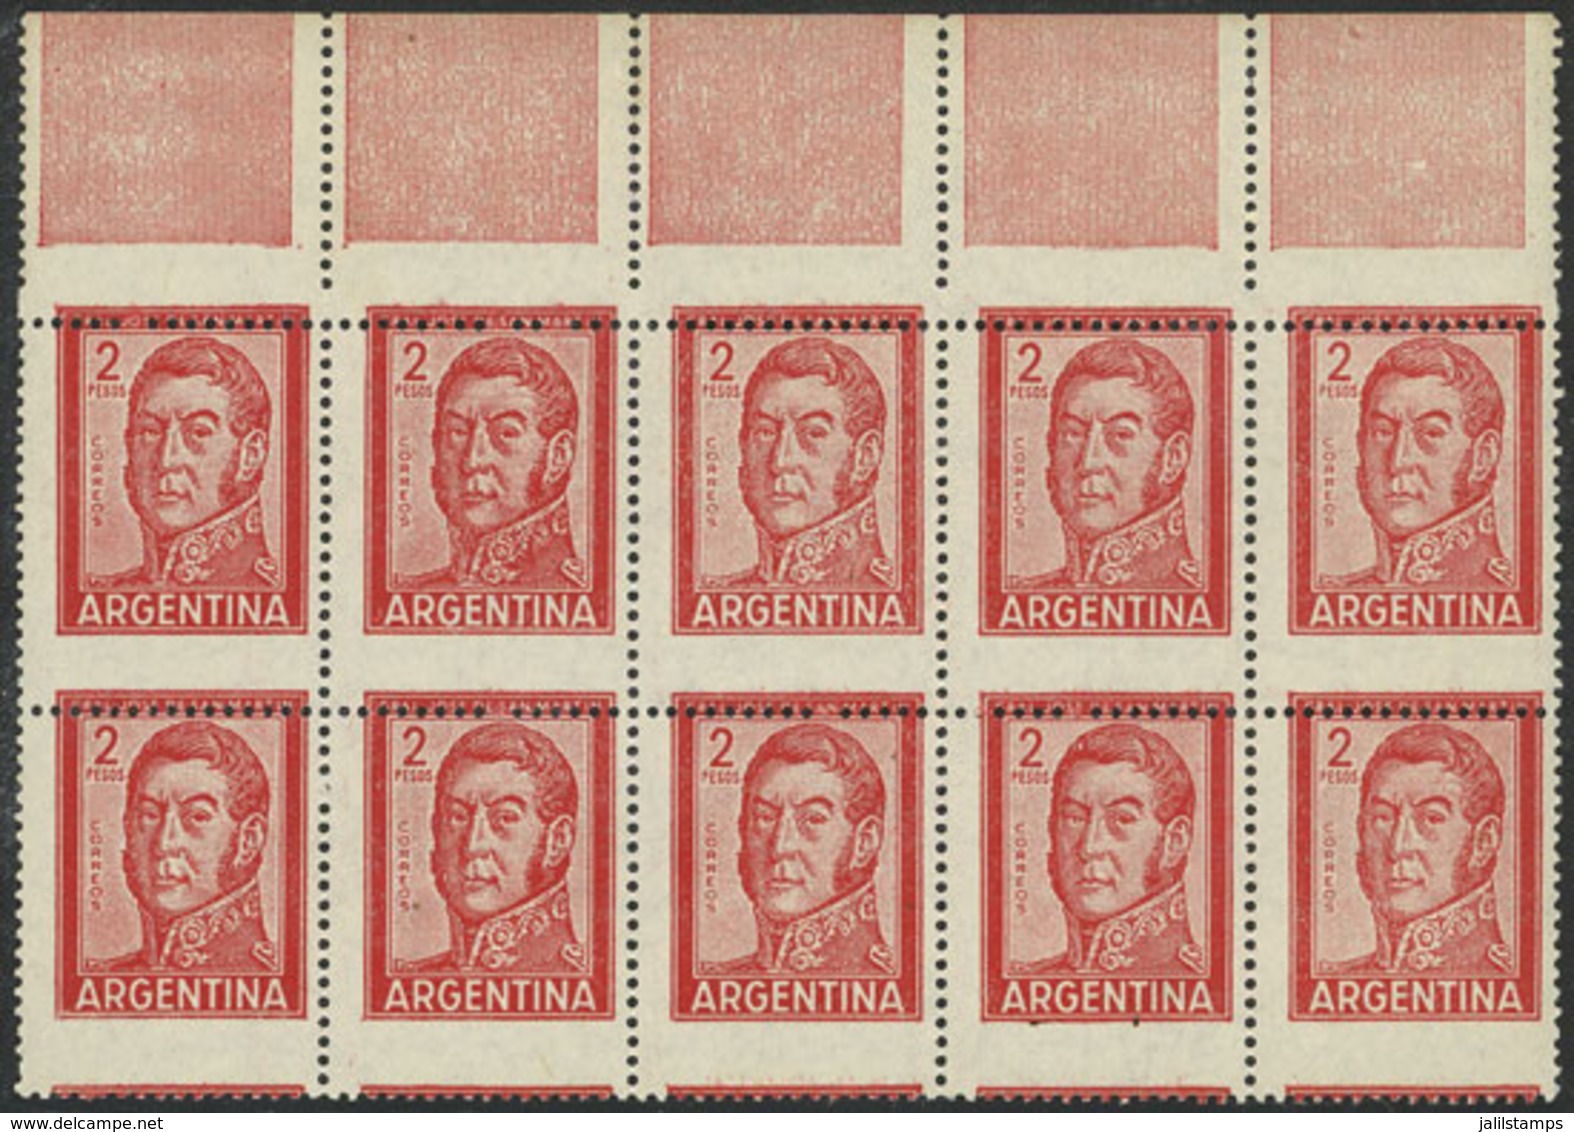 ARGENTINA: GJ.1133, 2P. San Martín, Block Of 10 With SHIFTED PERFORATION, Very Nice! - Unused Stamps